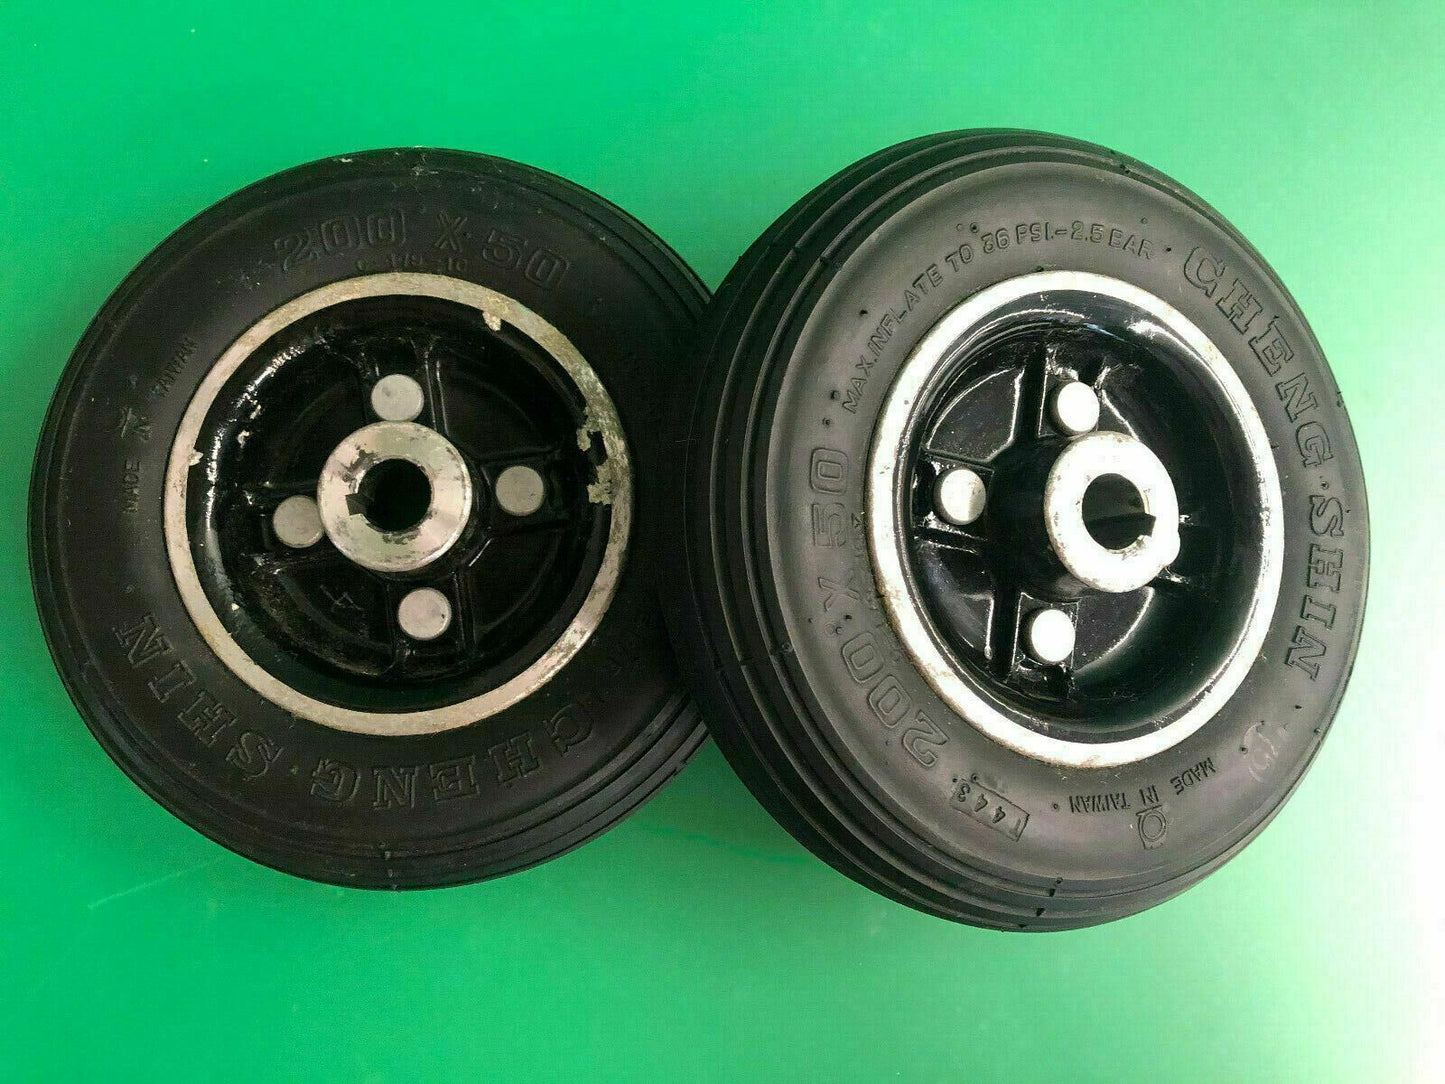 200 x 50 Rear Wheel Assembly for Drive Phantom Mobility Scooter #D725